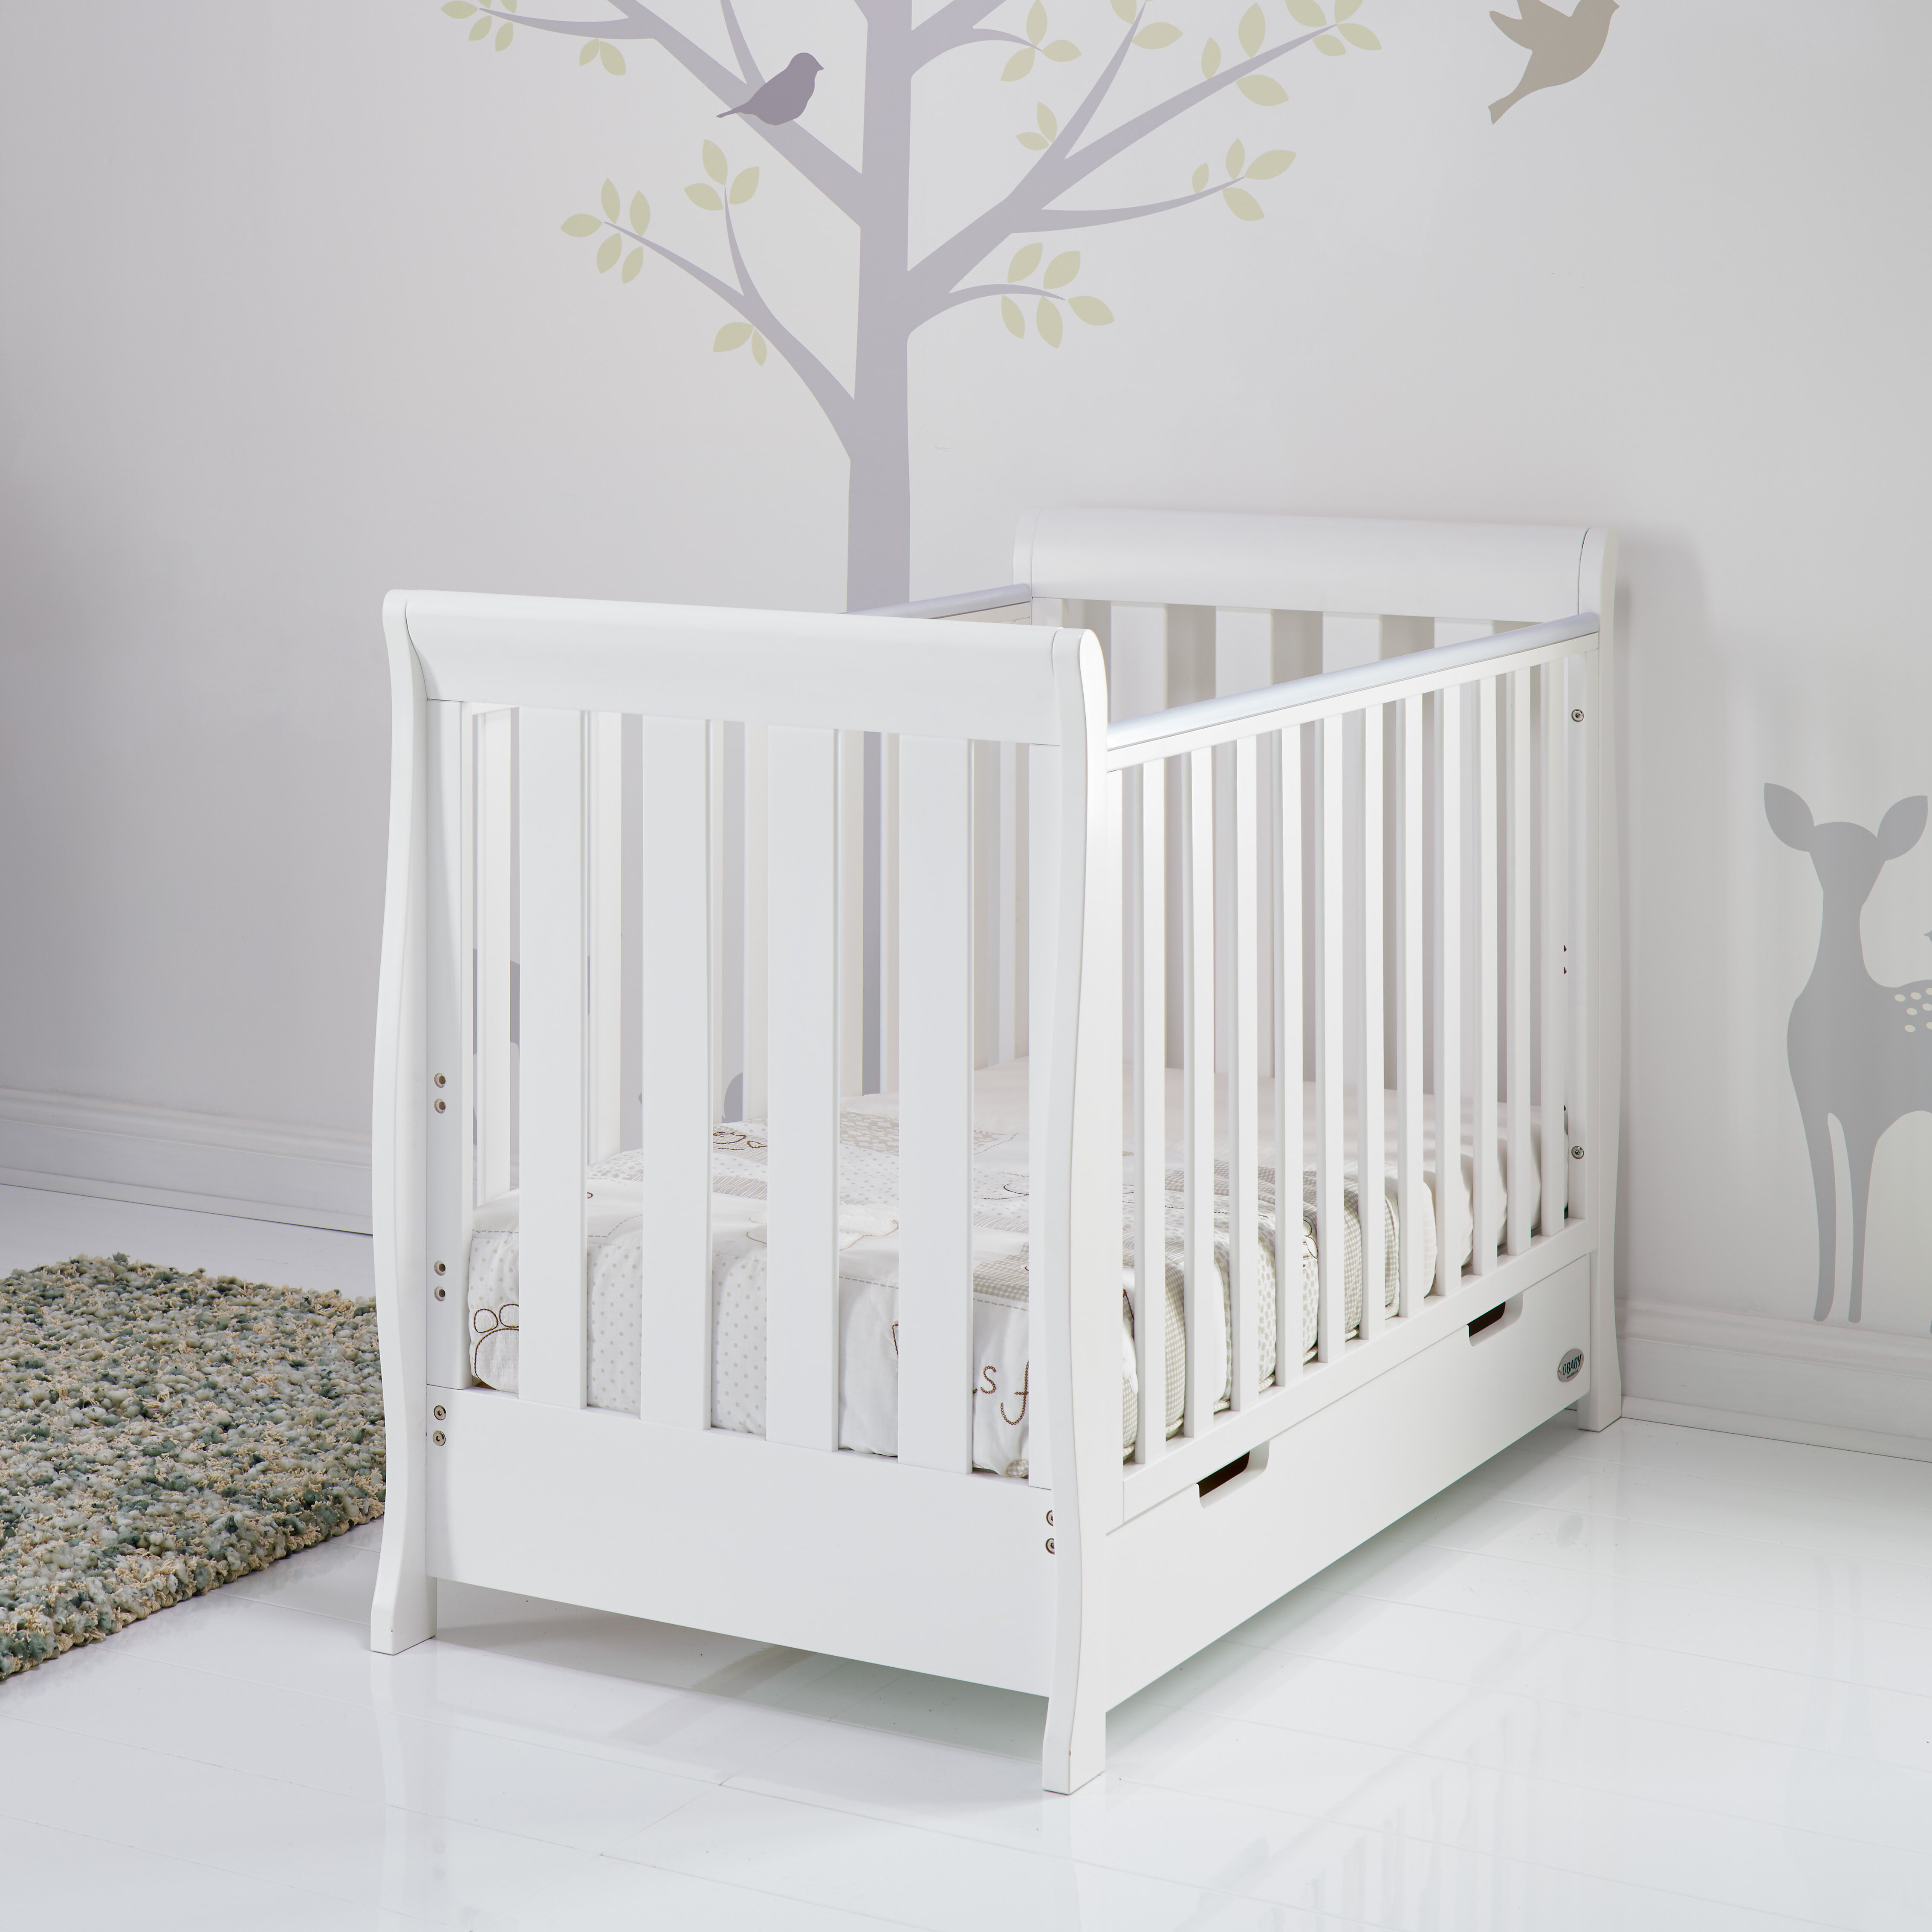 Obaby Stamford Mini Sleigh Cot Bed 